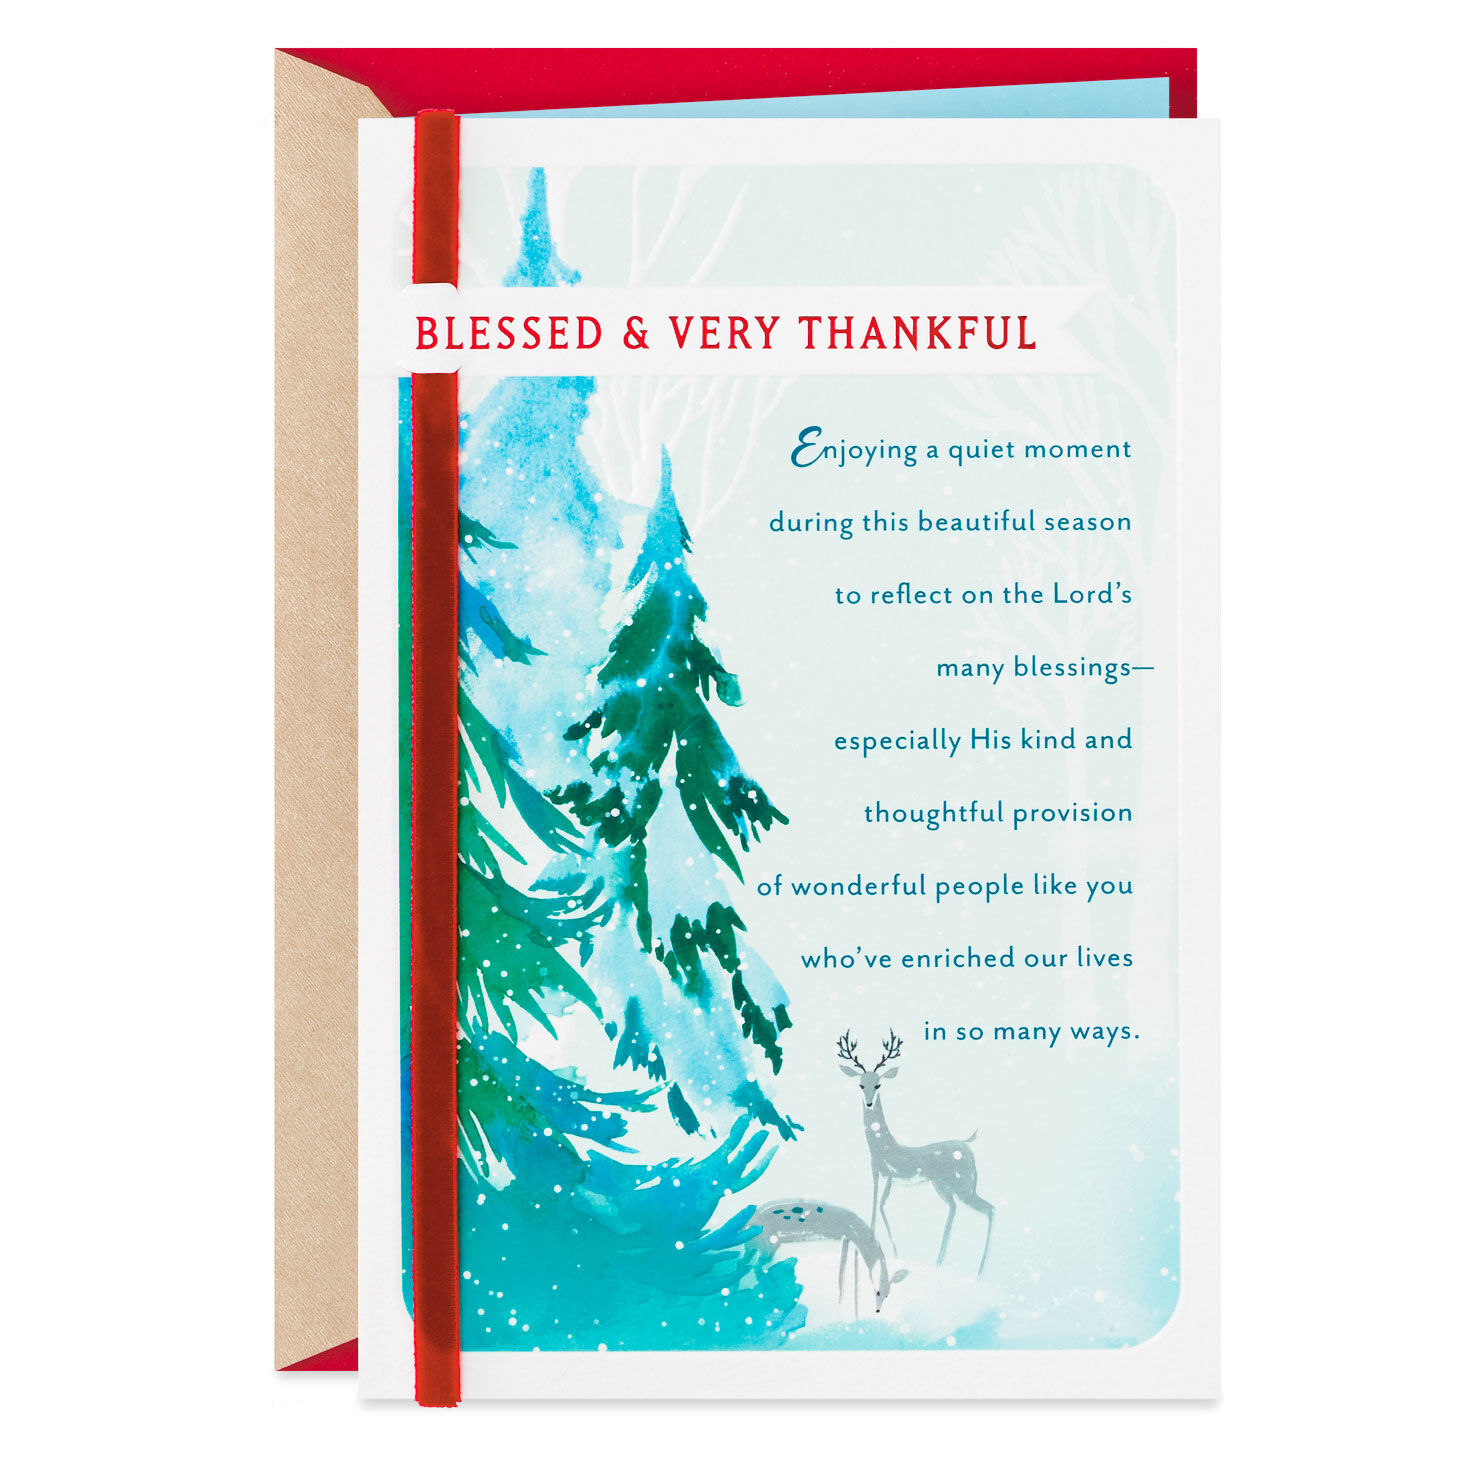 You're Lovingly Thought of Religious Christmas Card for only USD 4.99 | Hallmark